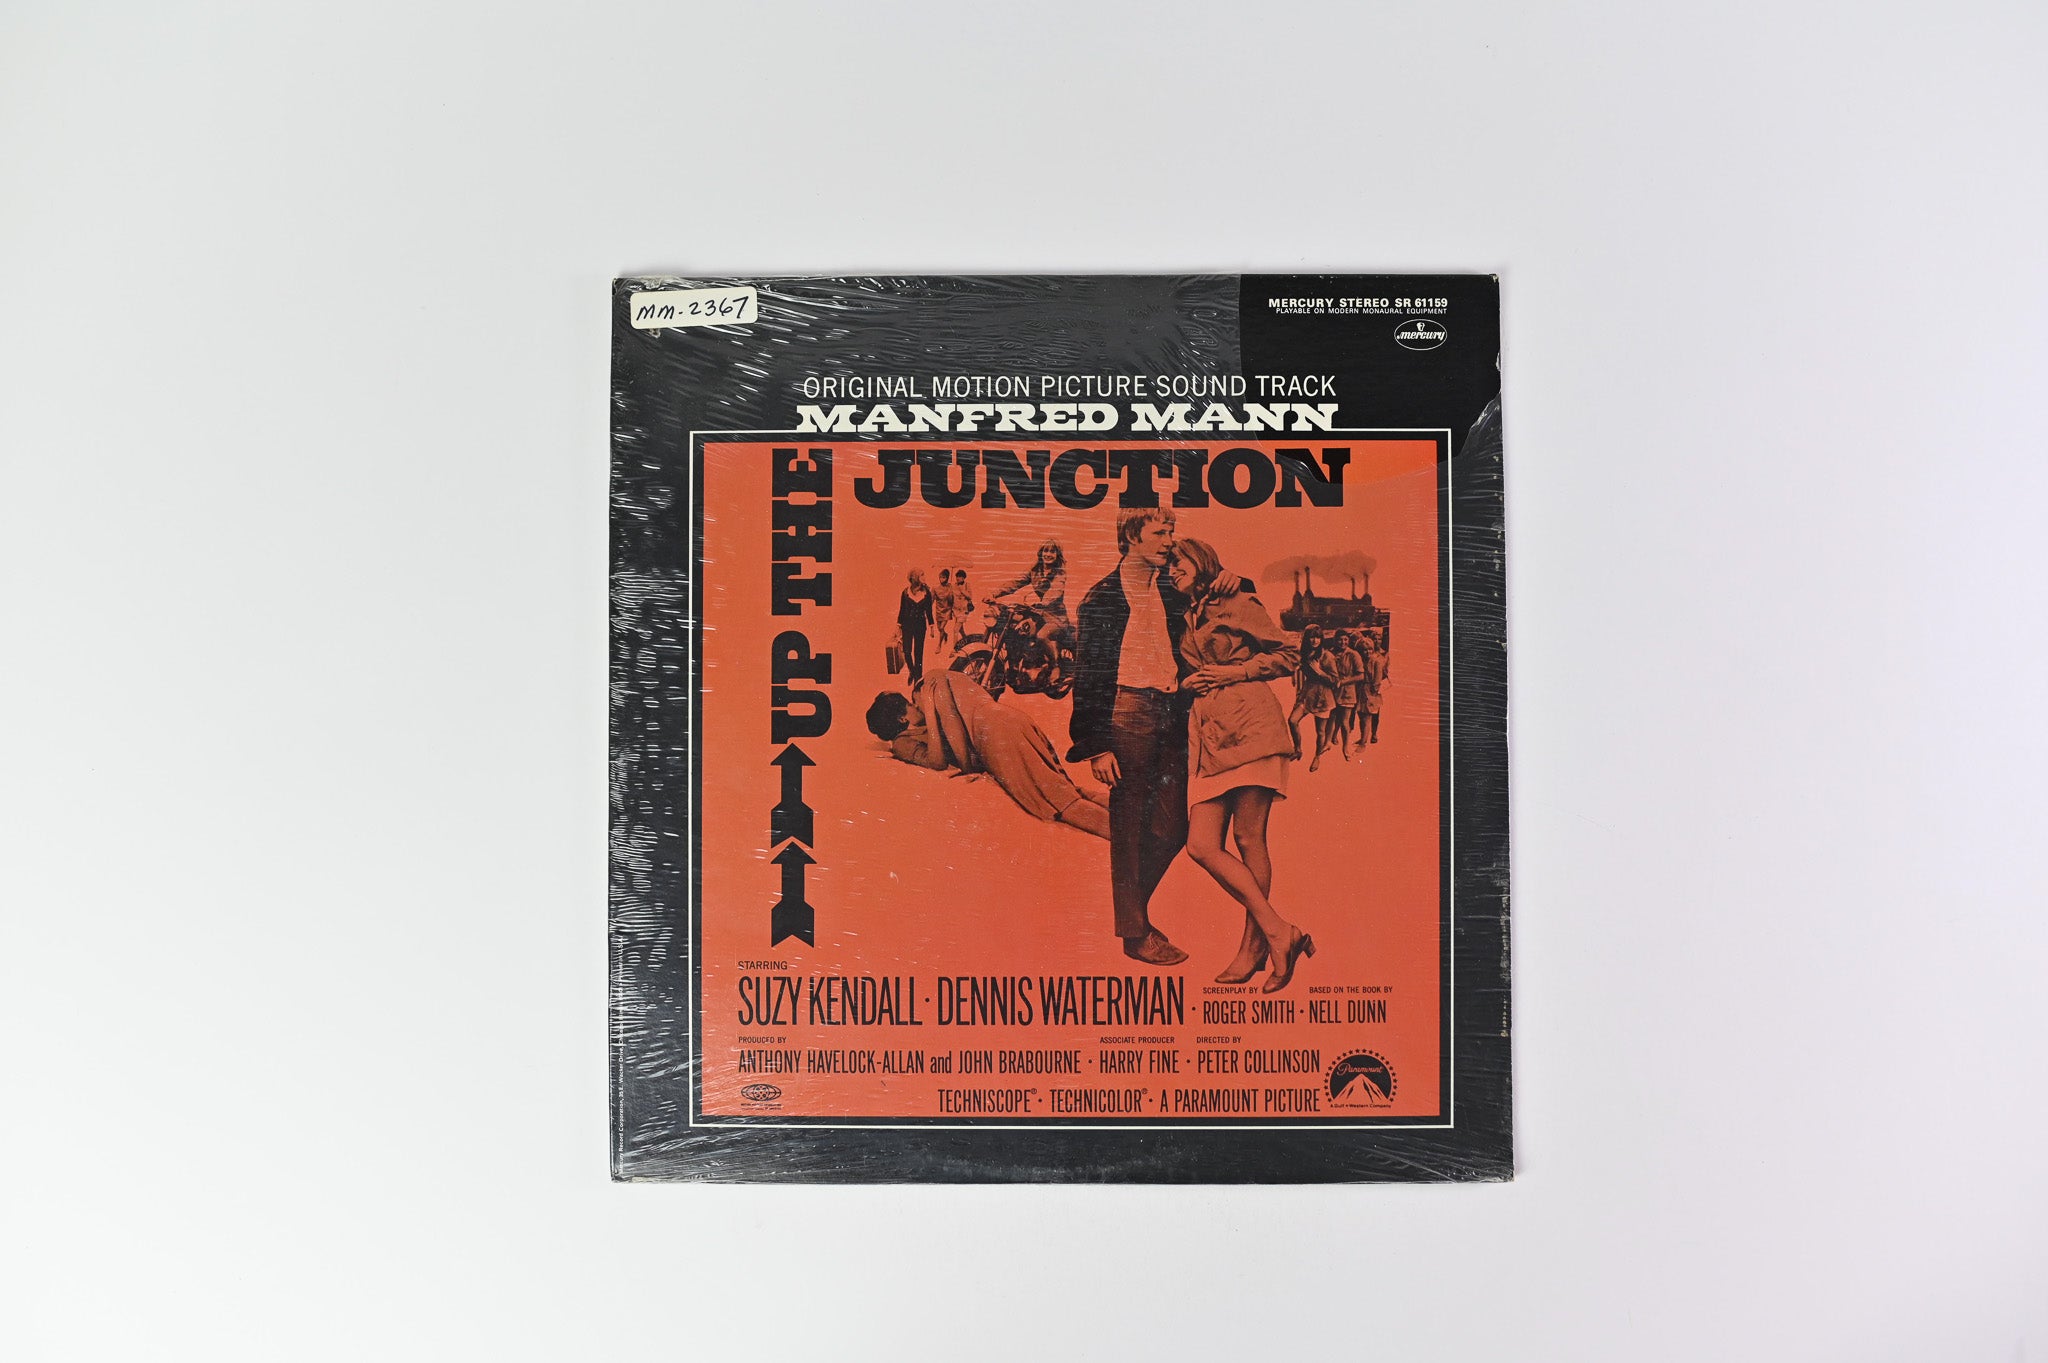 Manfred Mann - Up The Junction (Original Soundtrack Recording From The Paramount Picture) on Mercury Records Sealed